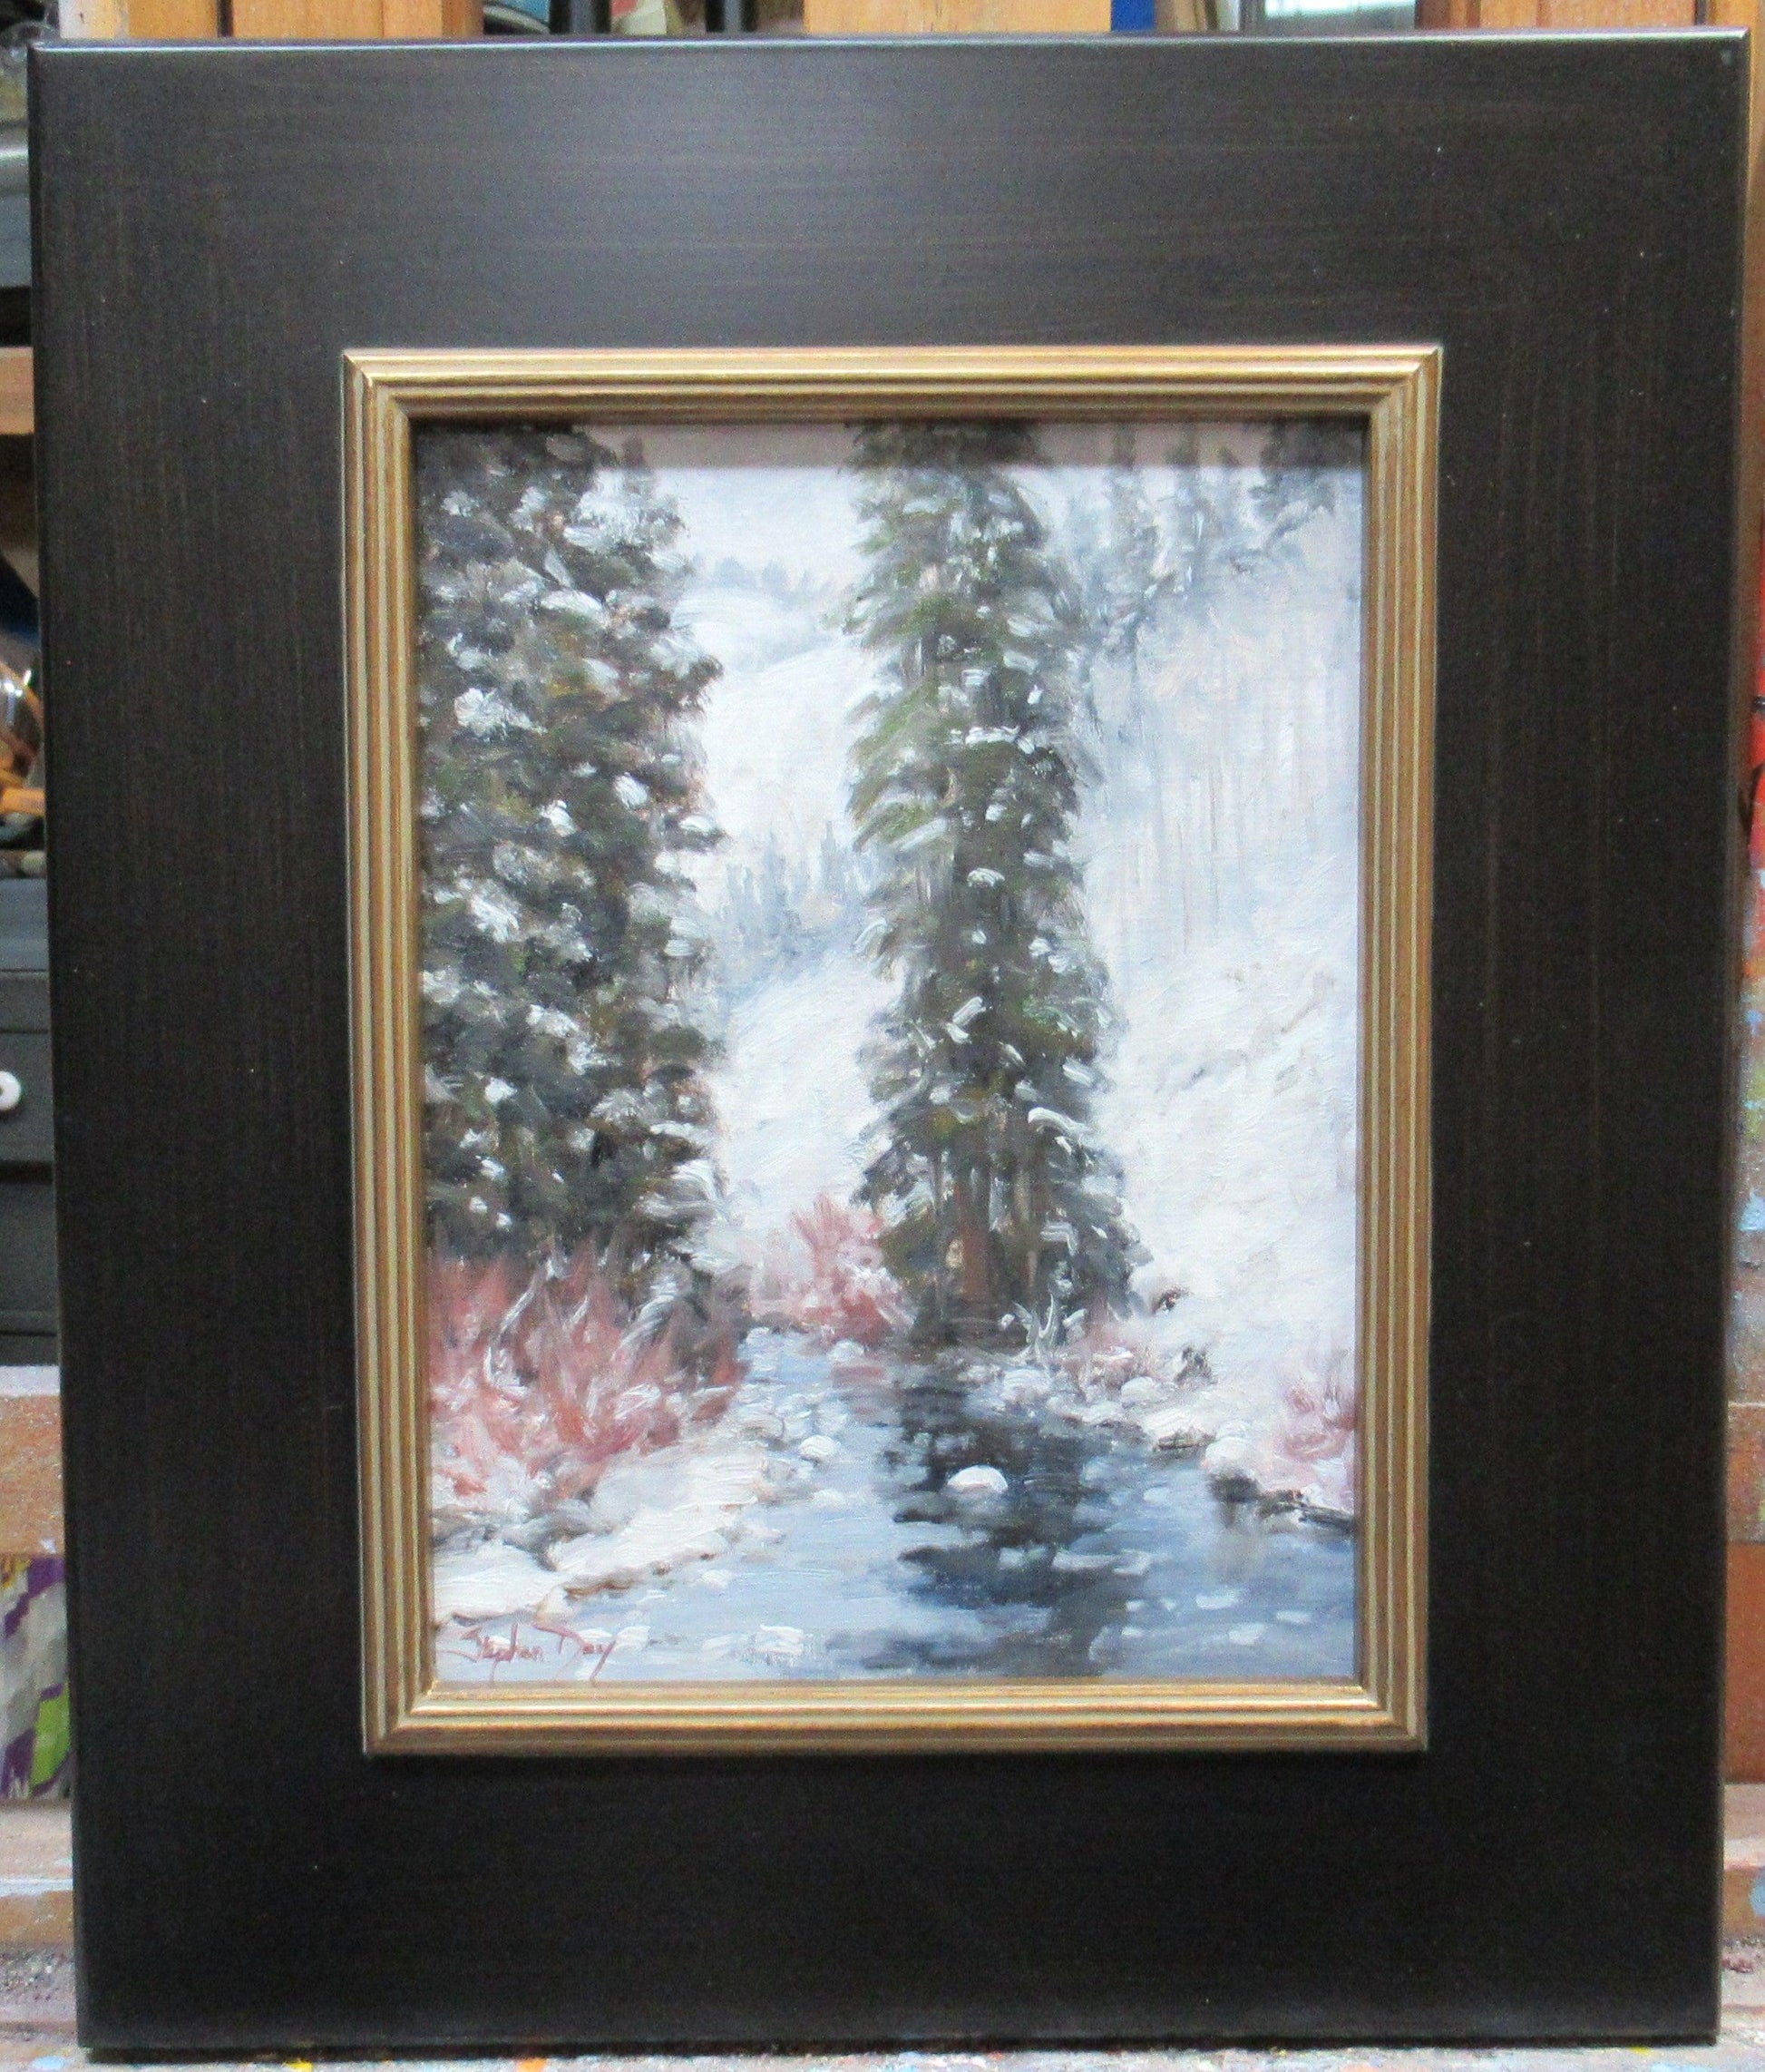 Wintry Day-painting-Stephen Day-Sorrel Sky Gallery